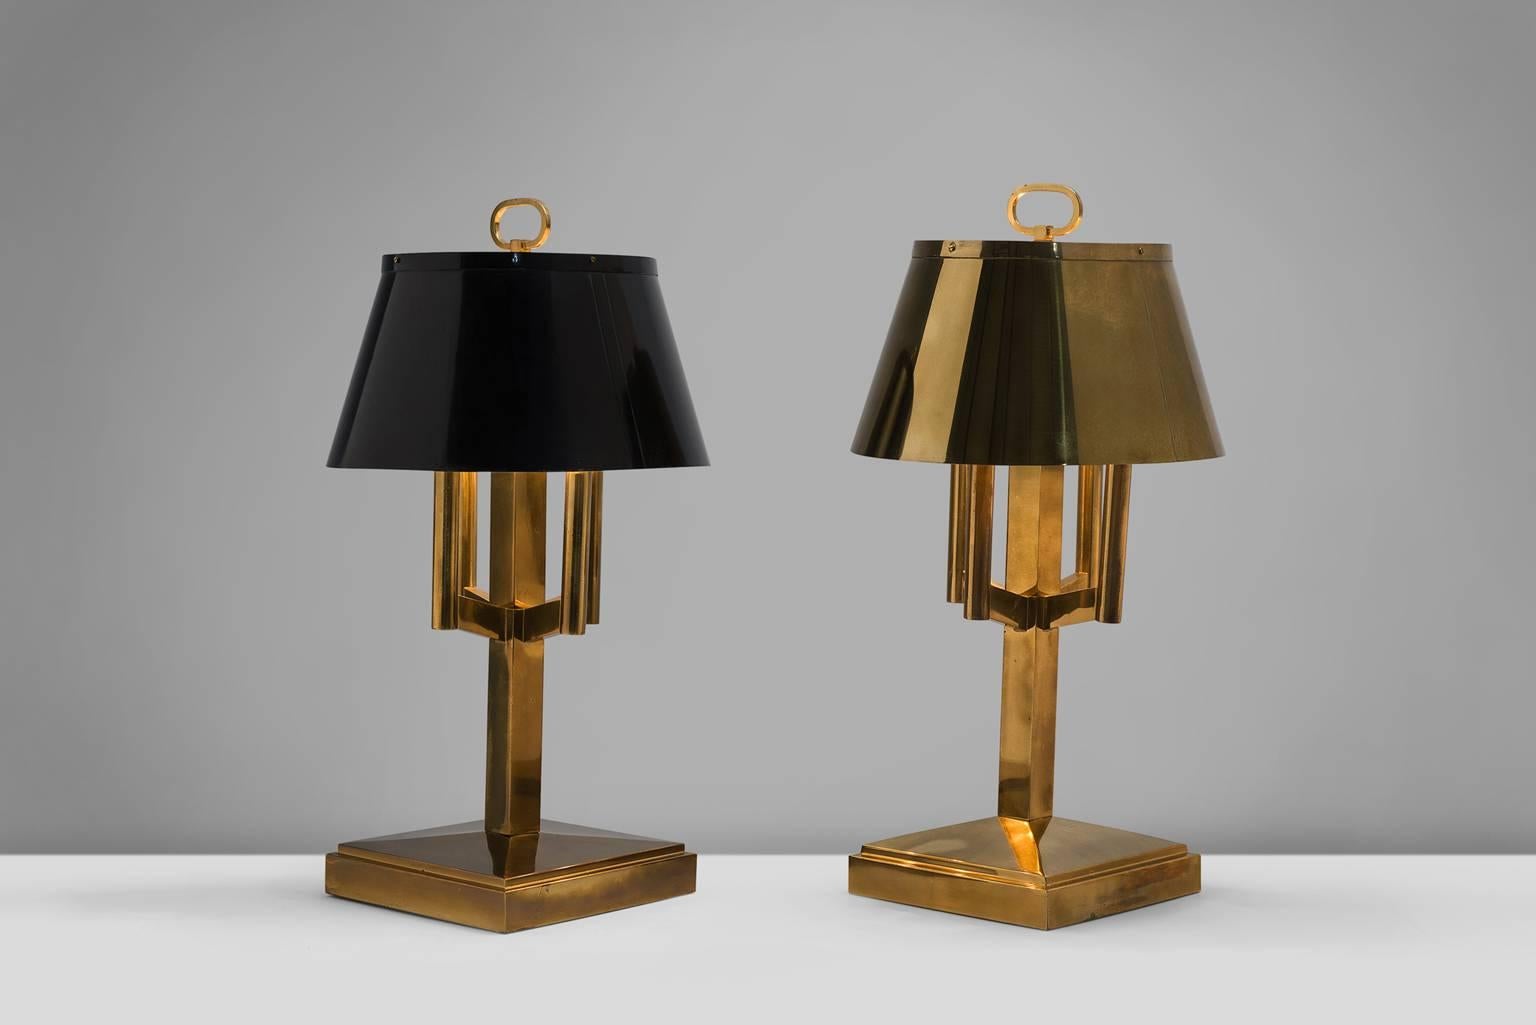 Table lights, brass, Italy, 1940s.

These strong and sturdy table lamps bear strong traits of the Classic shaded desk light. Yet the shades are combined with an strong, angular bases, giving them a modern aesthetic. These lamps have, due to time and